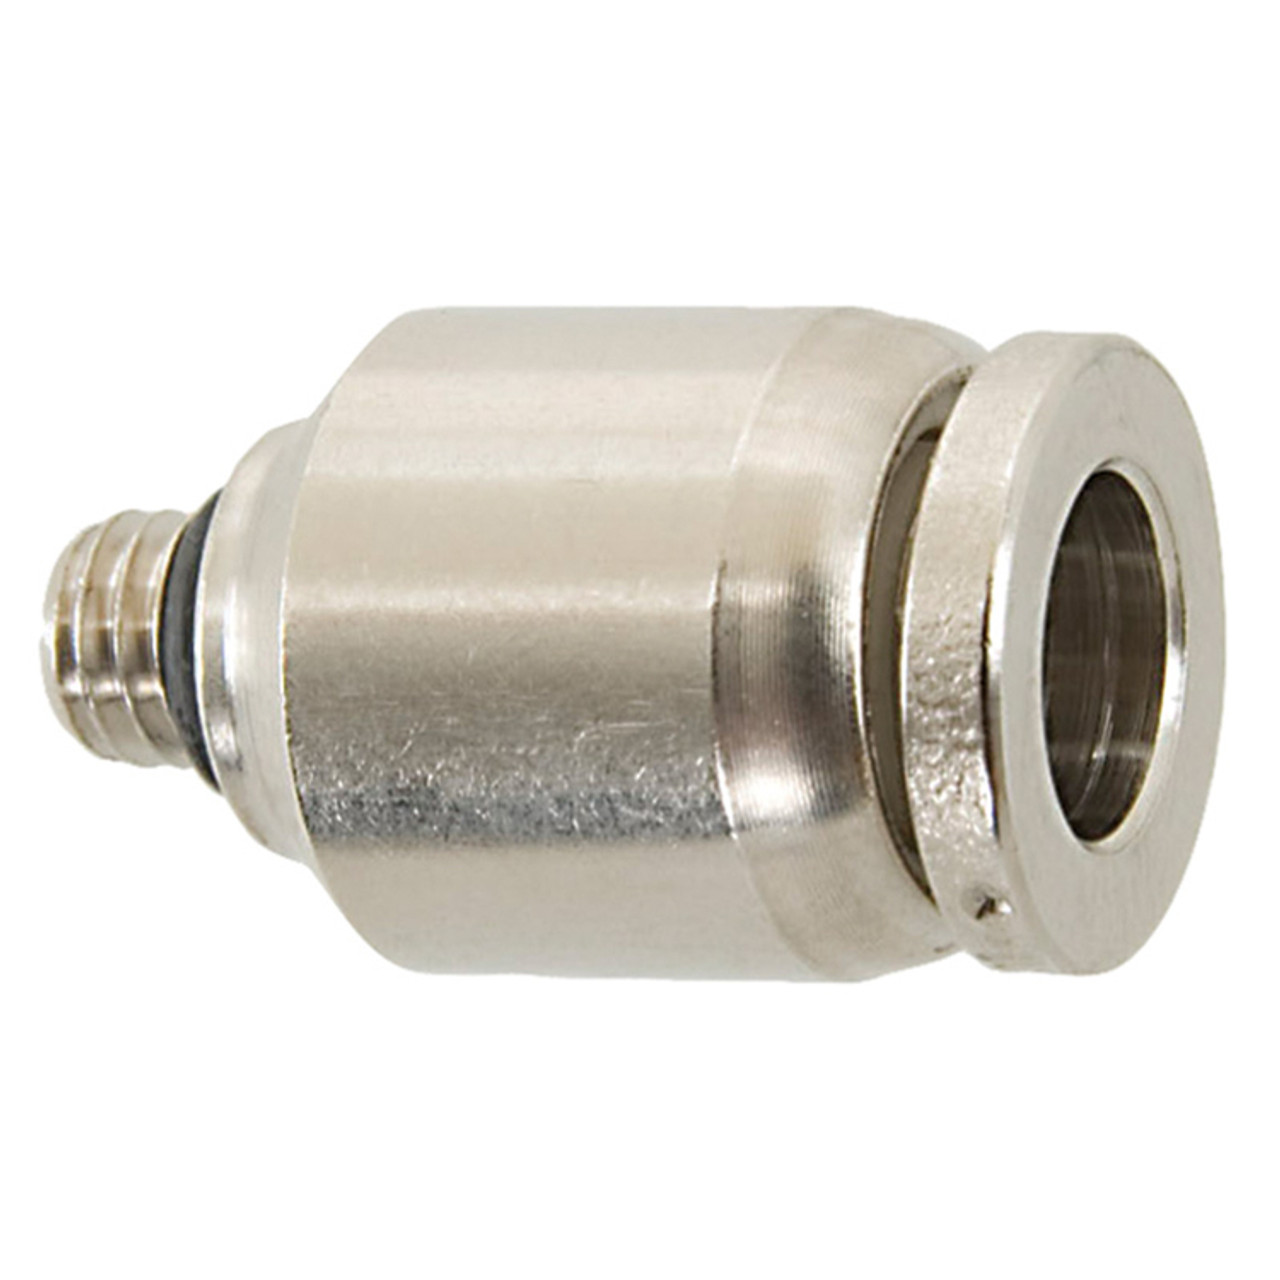 10-32 x 5/32" Nickel Plated Brass Male Thread - Push-To-Connect Connector   G6016P-UNF-02.5